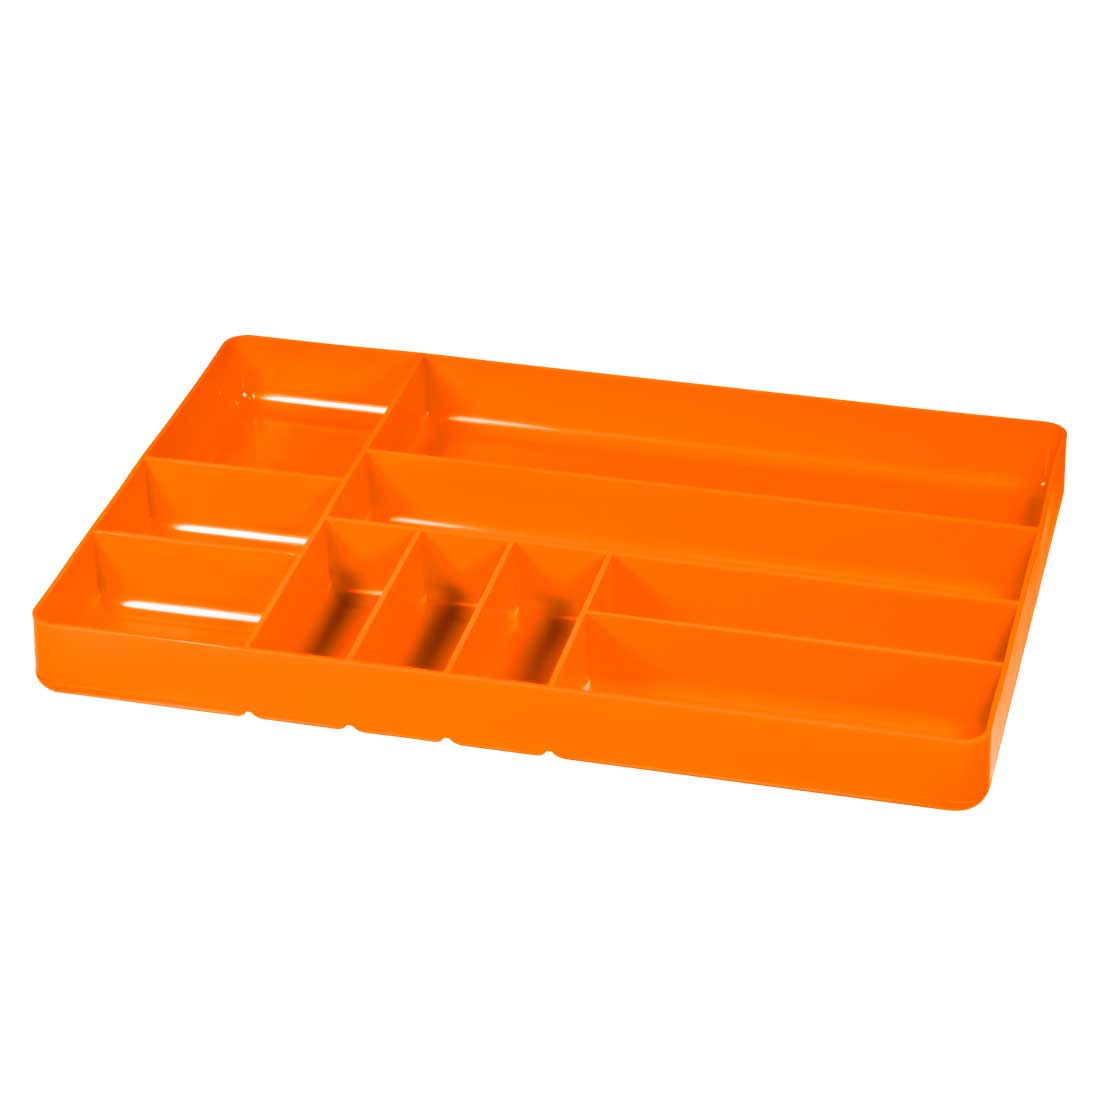 http://www.ernstmfg.com/Shared/Images/Product/Ten-Compartment-Organizer-Tray-Orange/5019_Ten-Compartment-Organizer-Tray_Orange_1100.jpg